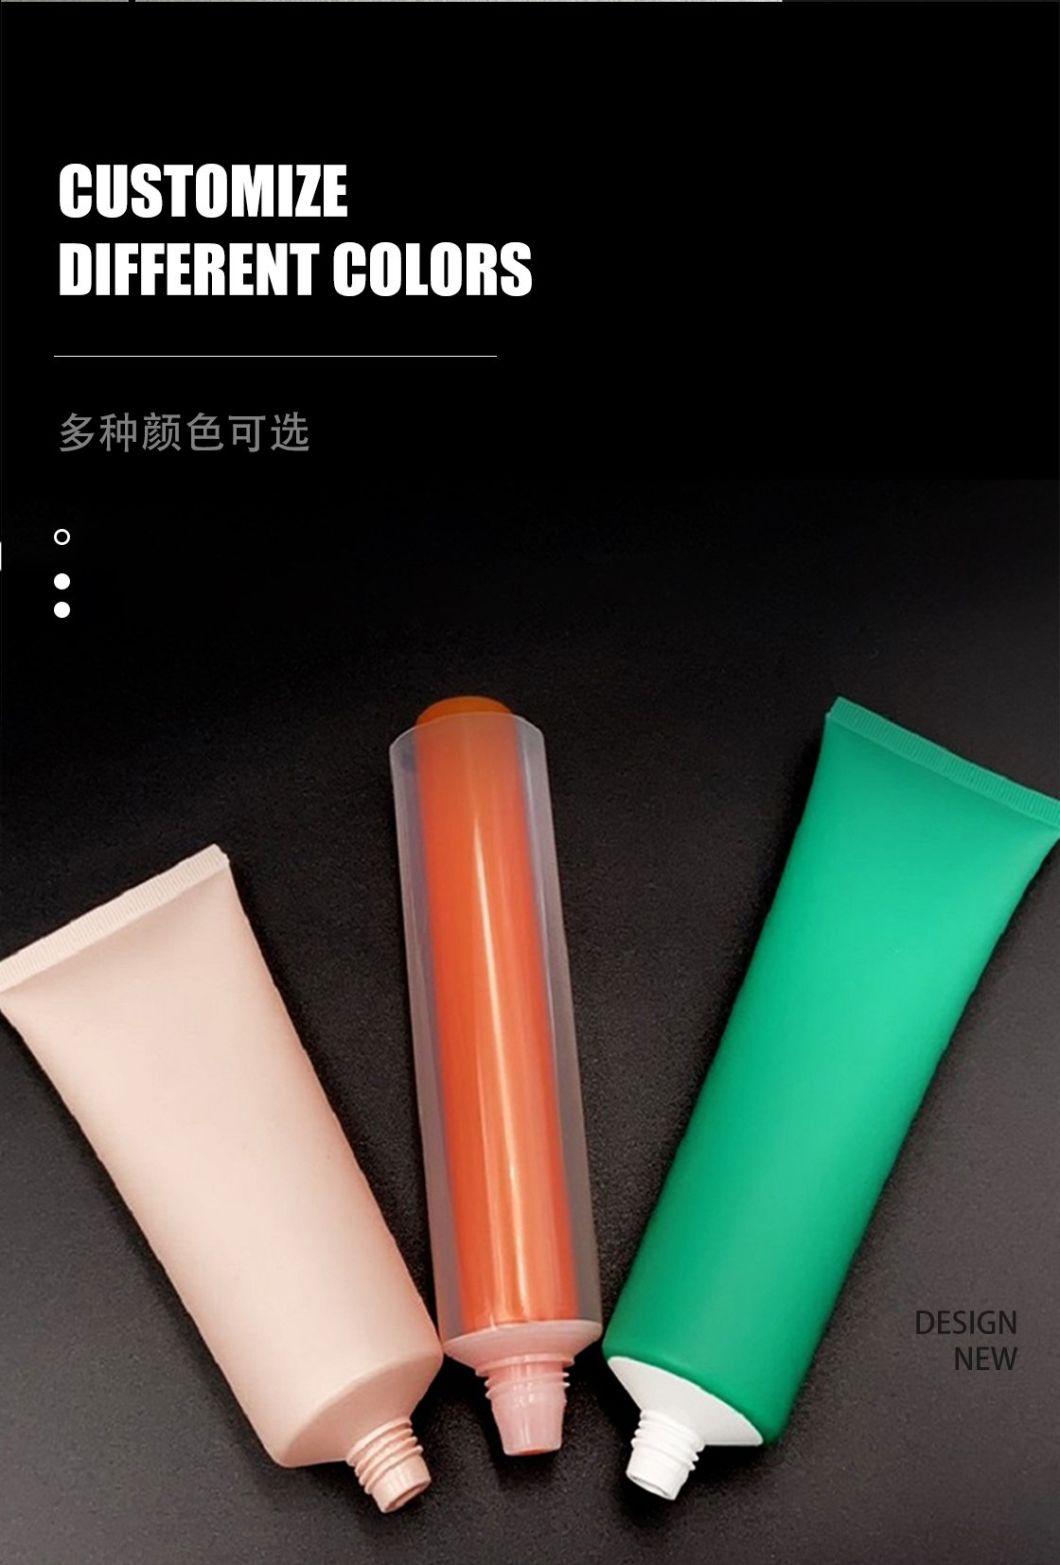 White PE Plastic Cosmetic Printing Tube with Flip Top Cover Plastic Products